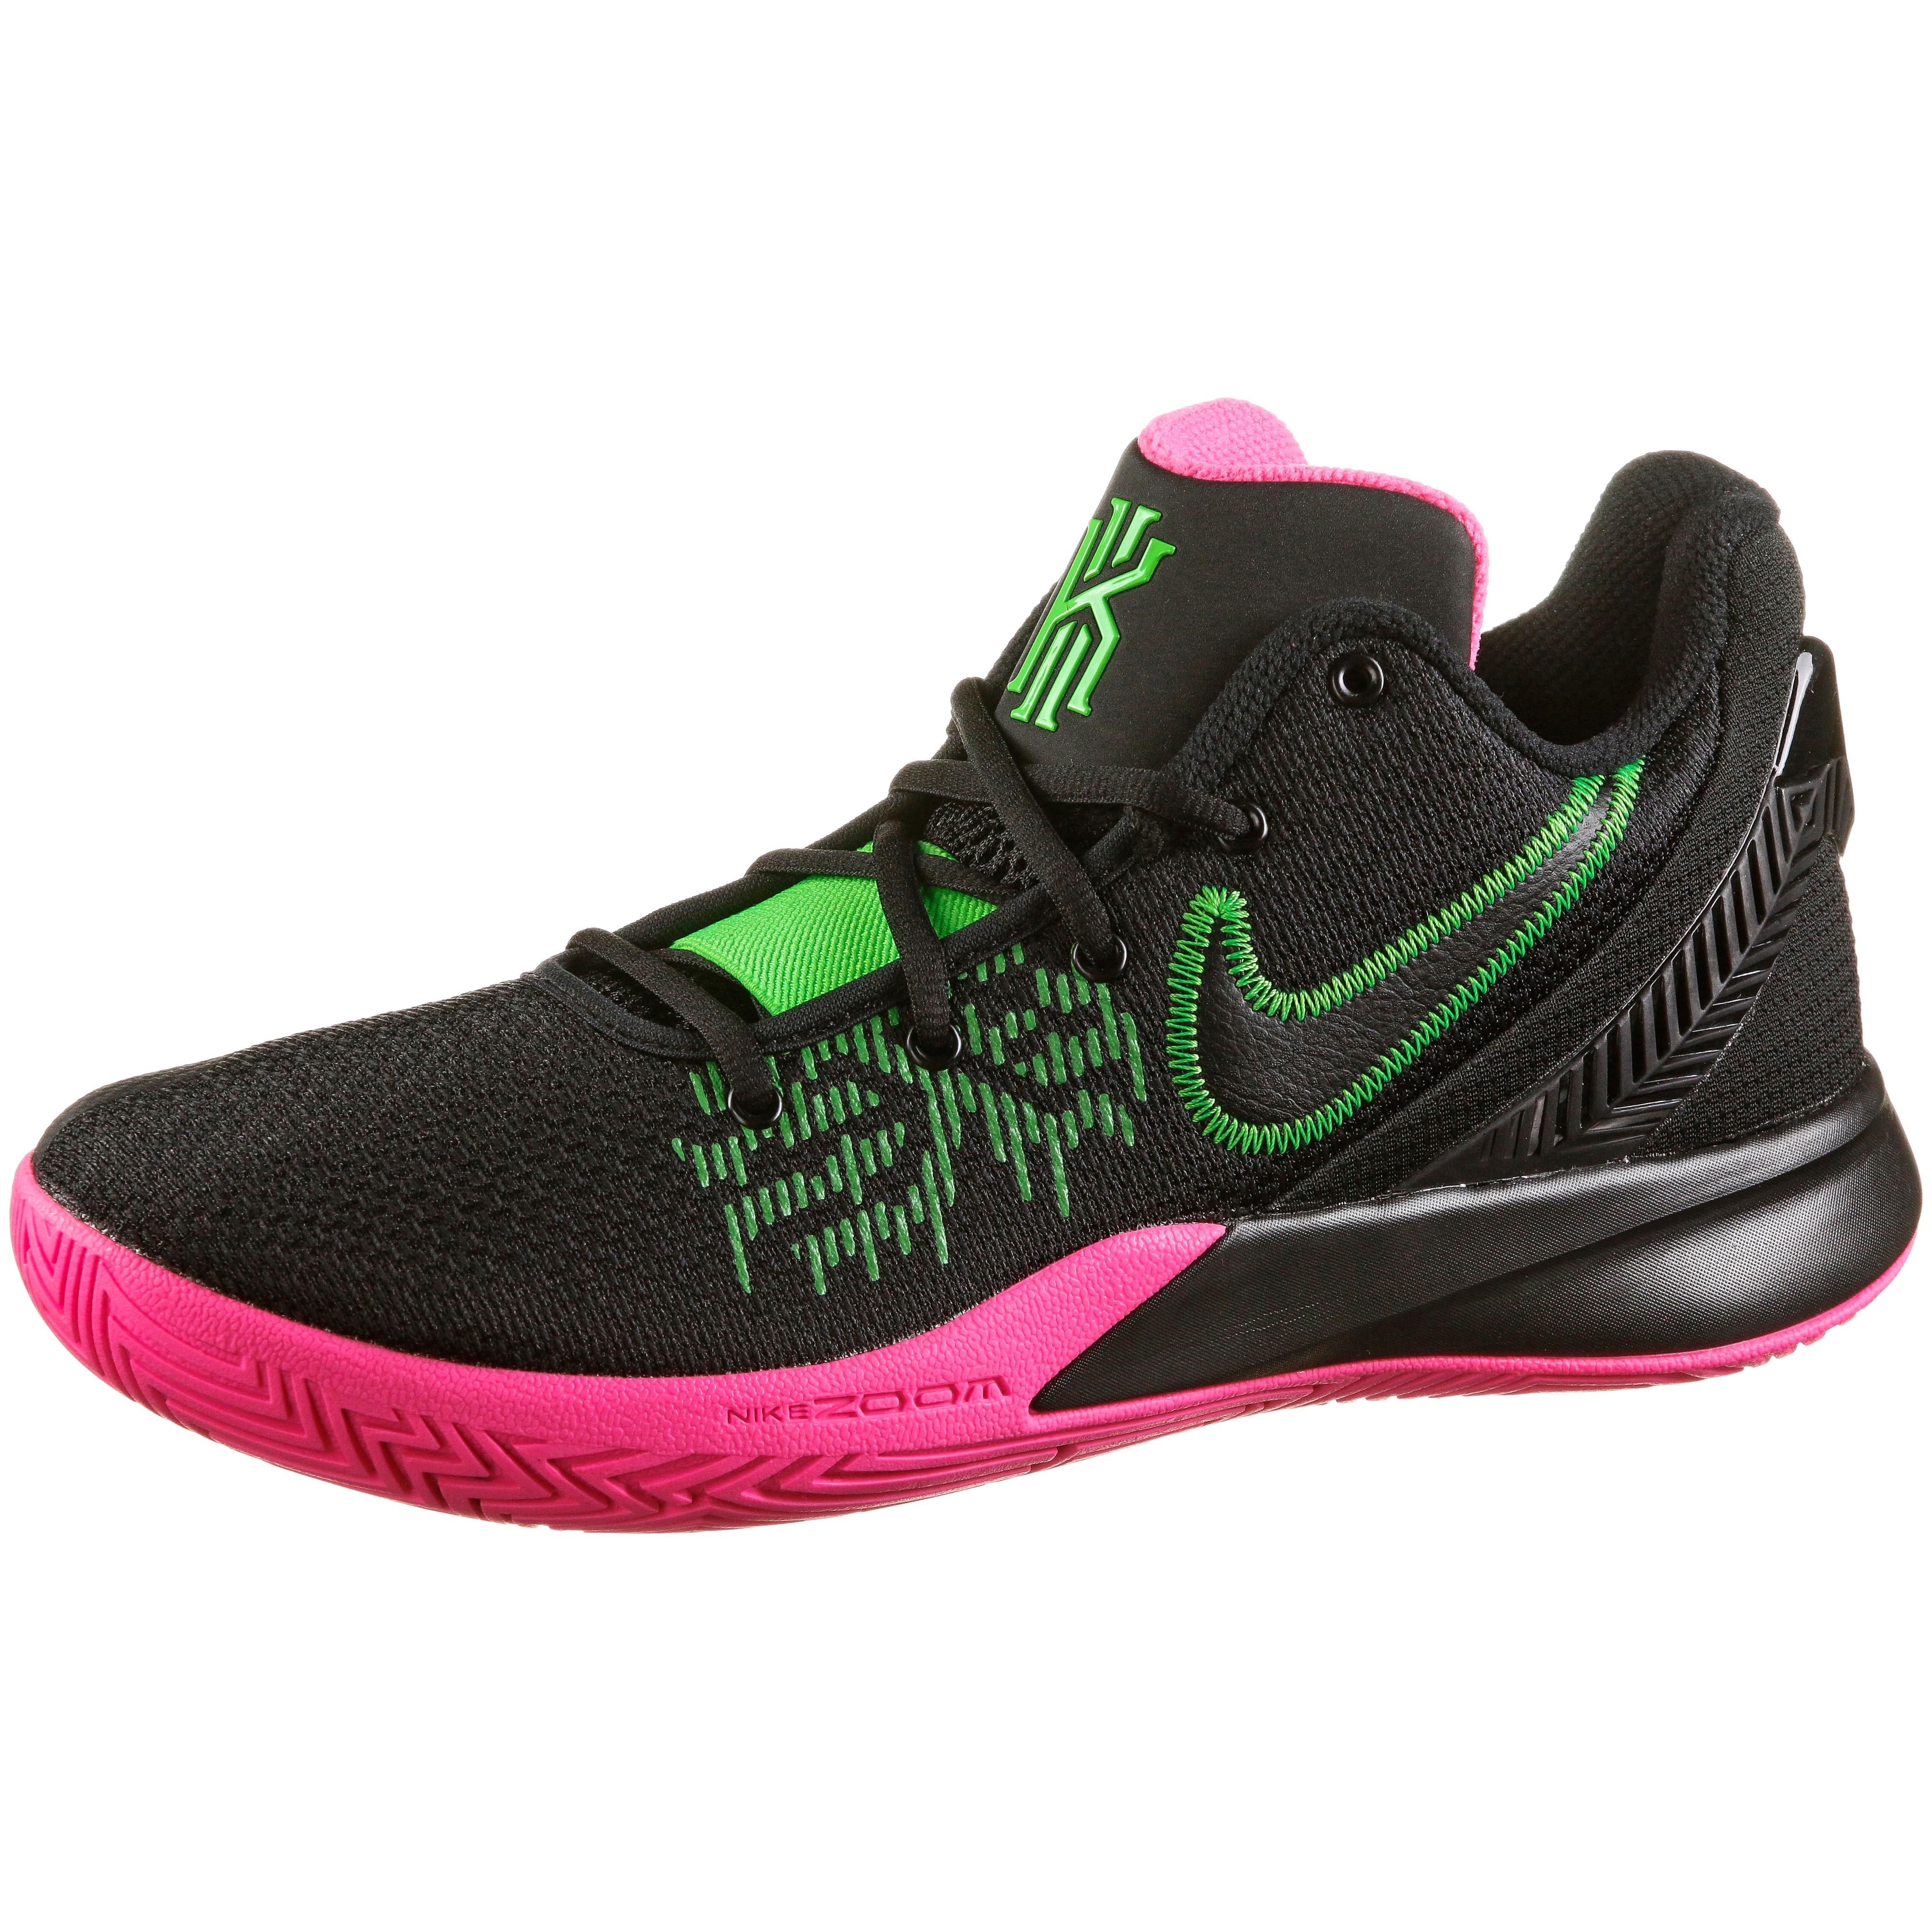 kyrie flytrap green and black